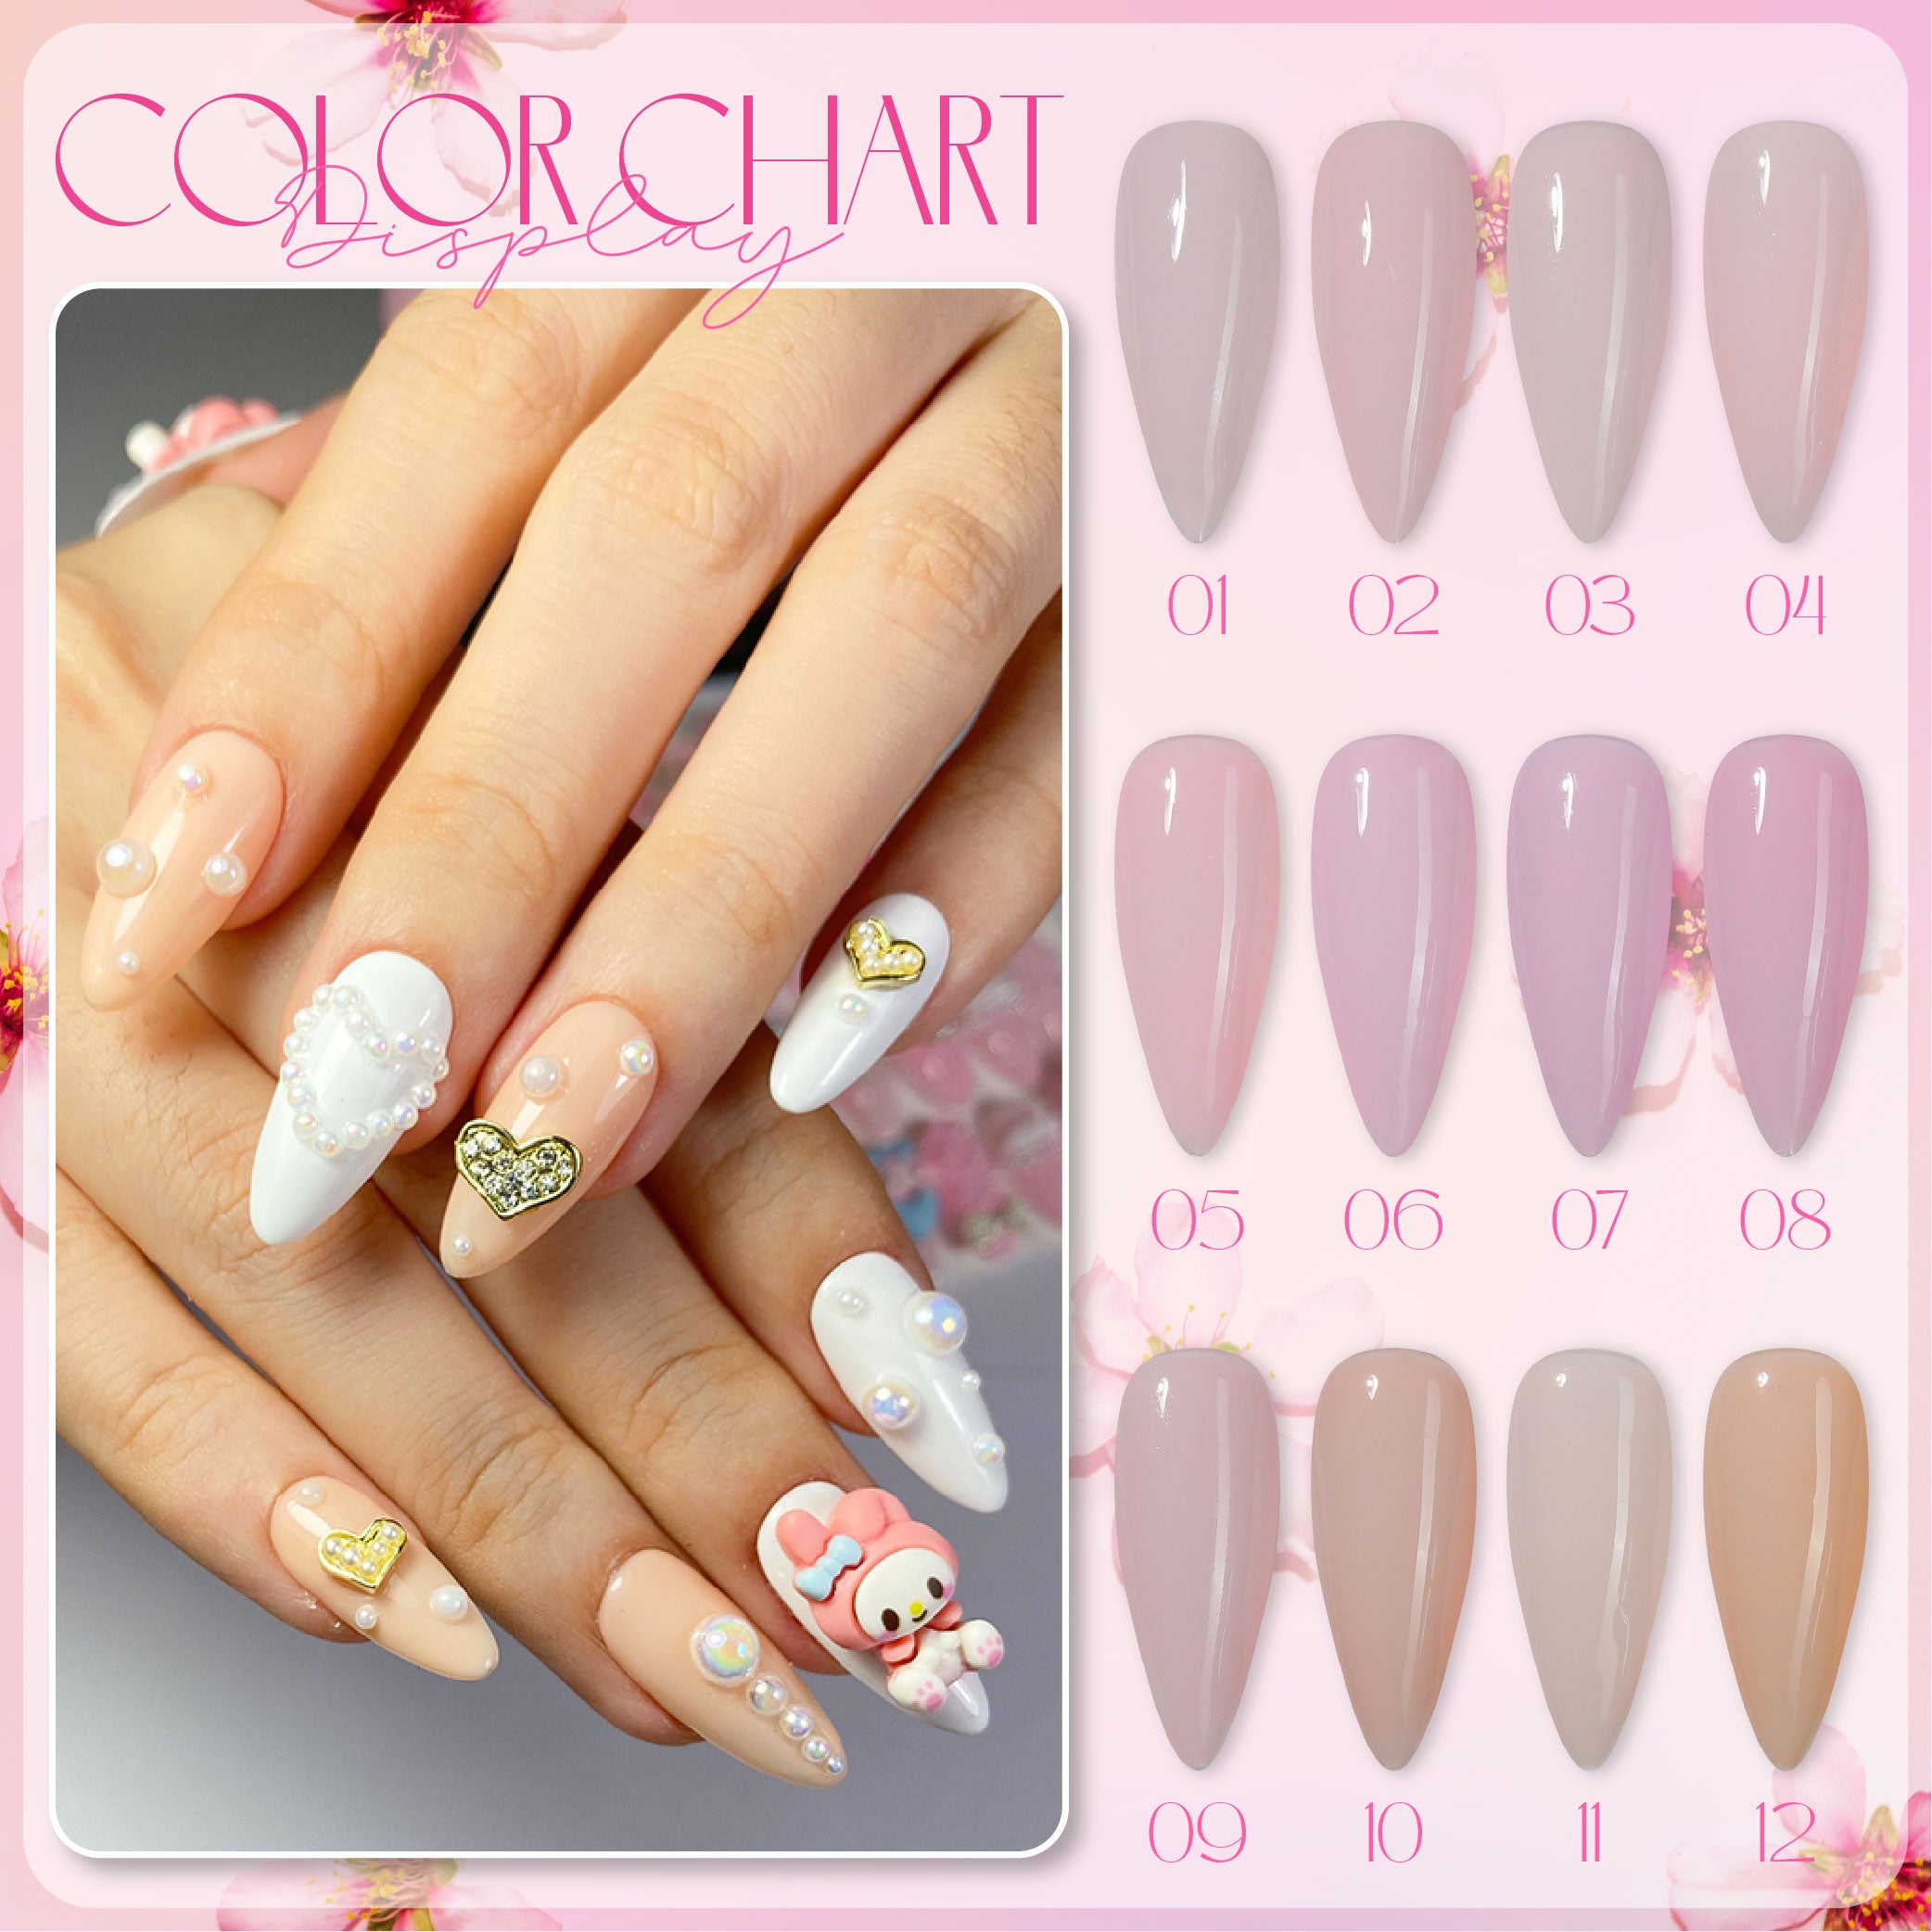 LDS BP - 06 - Blossom Pink Collection